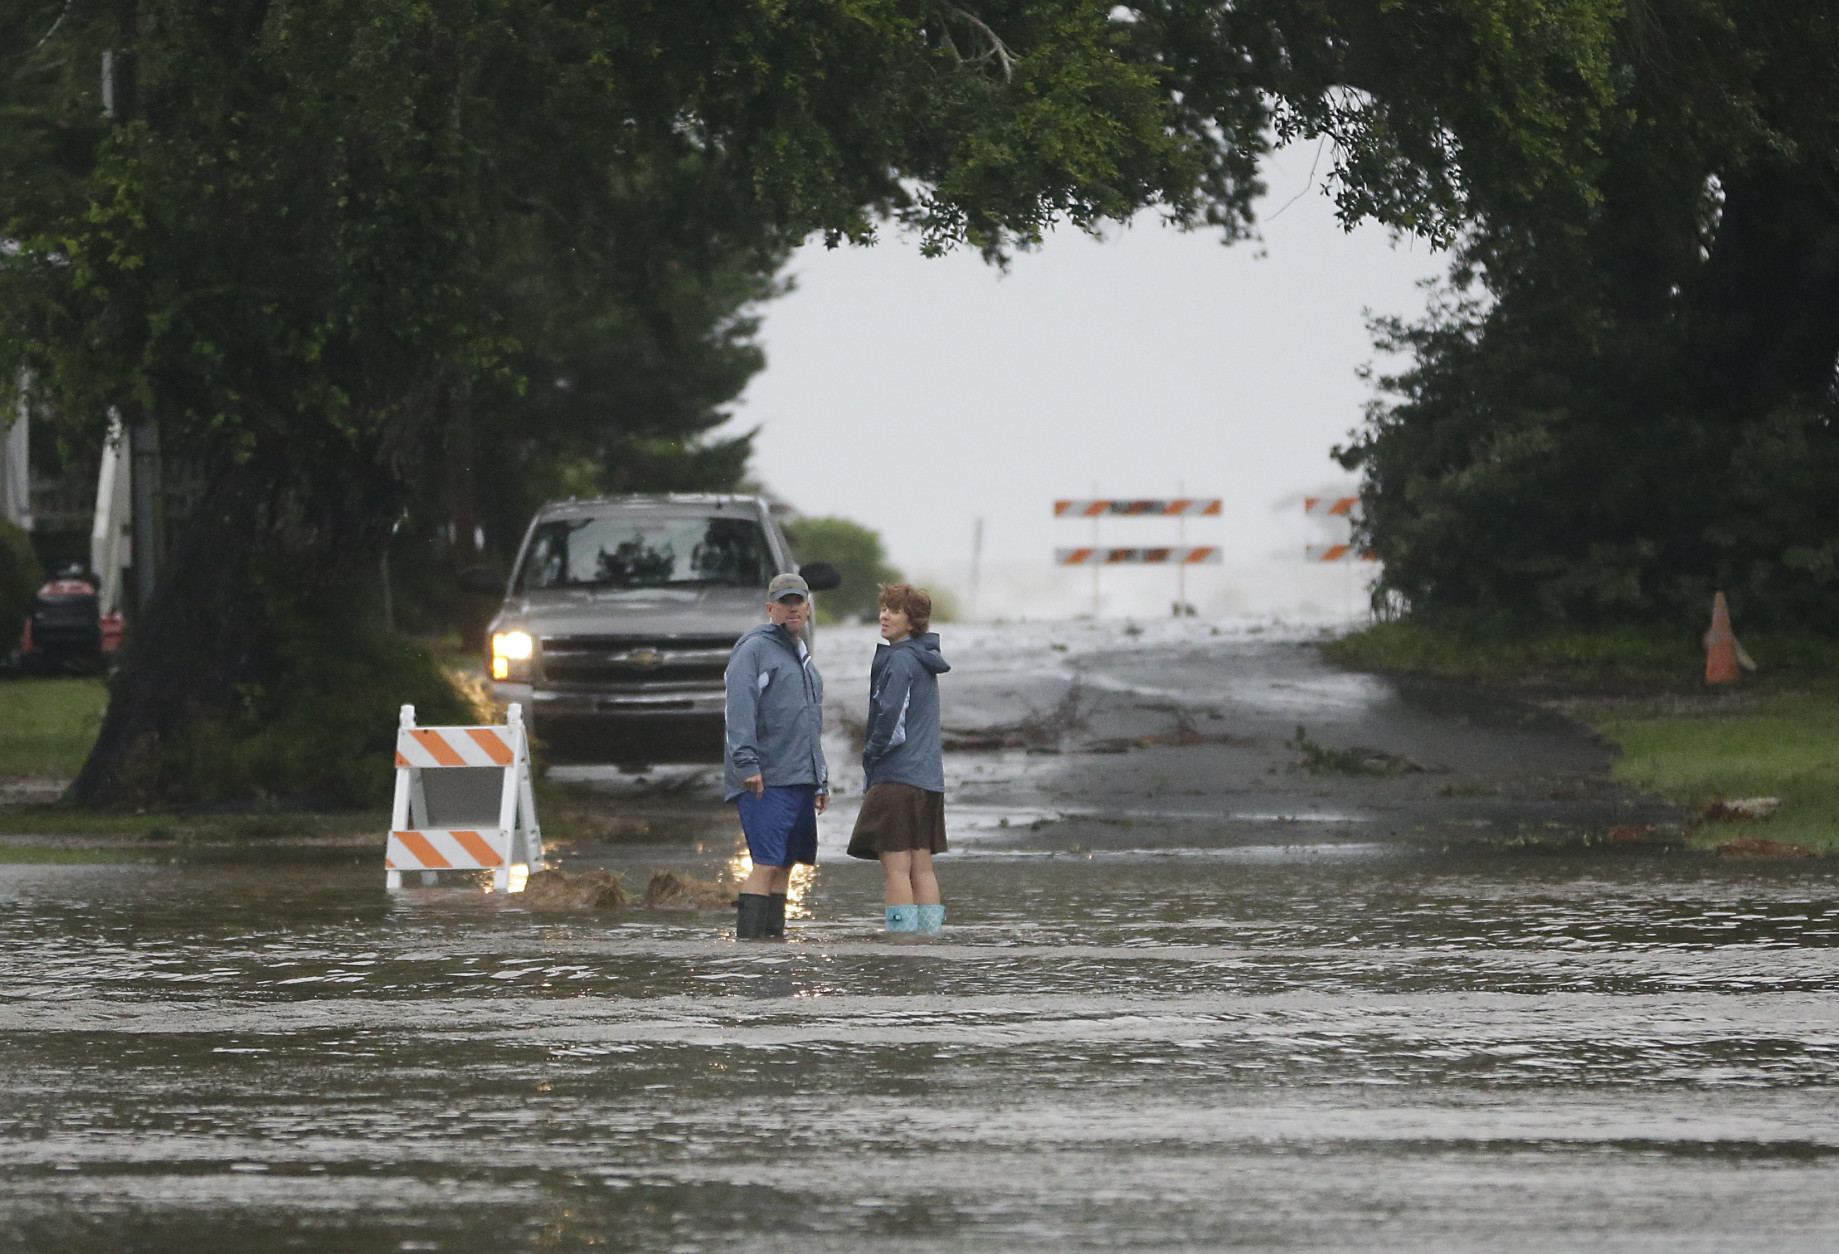 Residents check on a flooded street before turning back as Hurricane Hermine nears the Florida coast, Thursday, Sept. 1, 2016, in Cedar Key, Fla. Tropical Storm Hermine strengthened into a hurricane Thursday and steamed toward Florida's Gulf Coast, where people put up shutters, nailed plywood across store windows and braced for the first direct hit on the state from a hurricane in over a decade. (AP Photo/John Raoux)